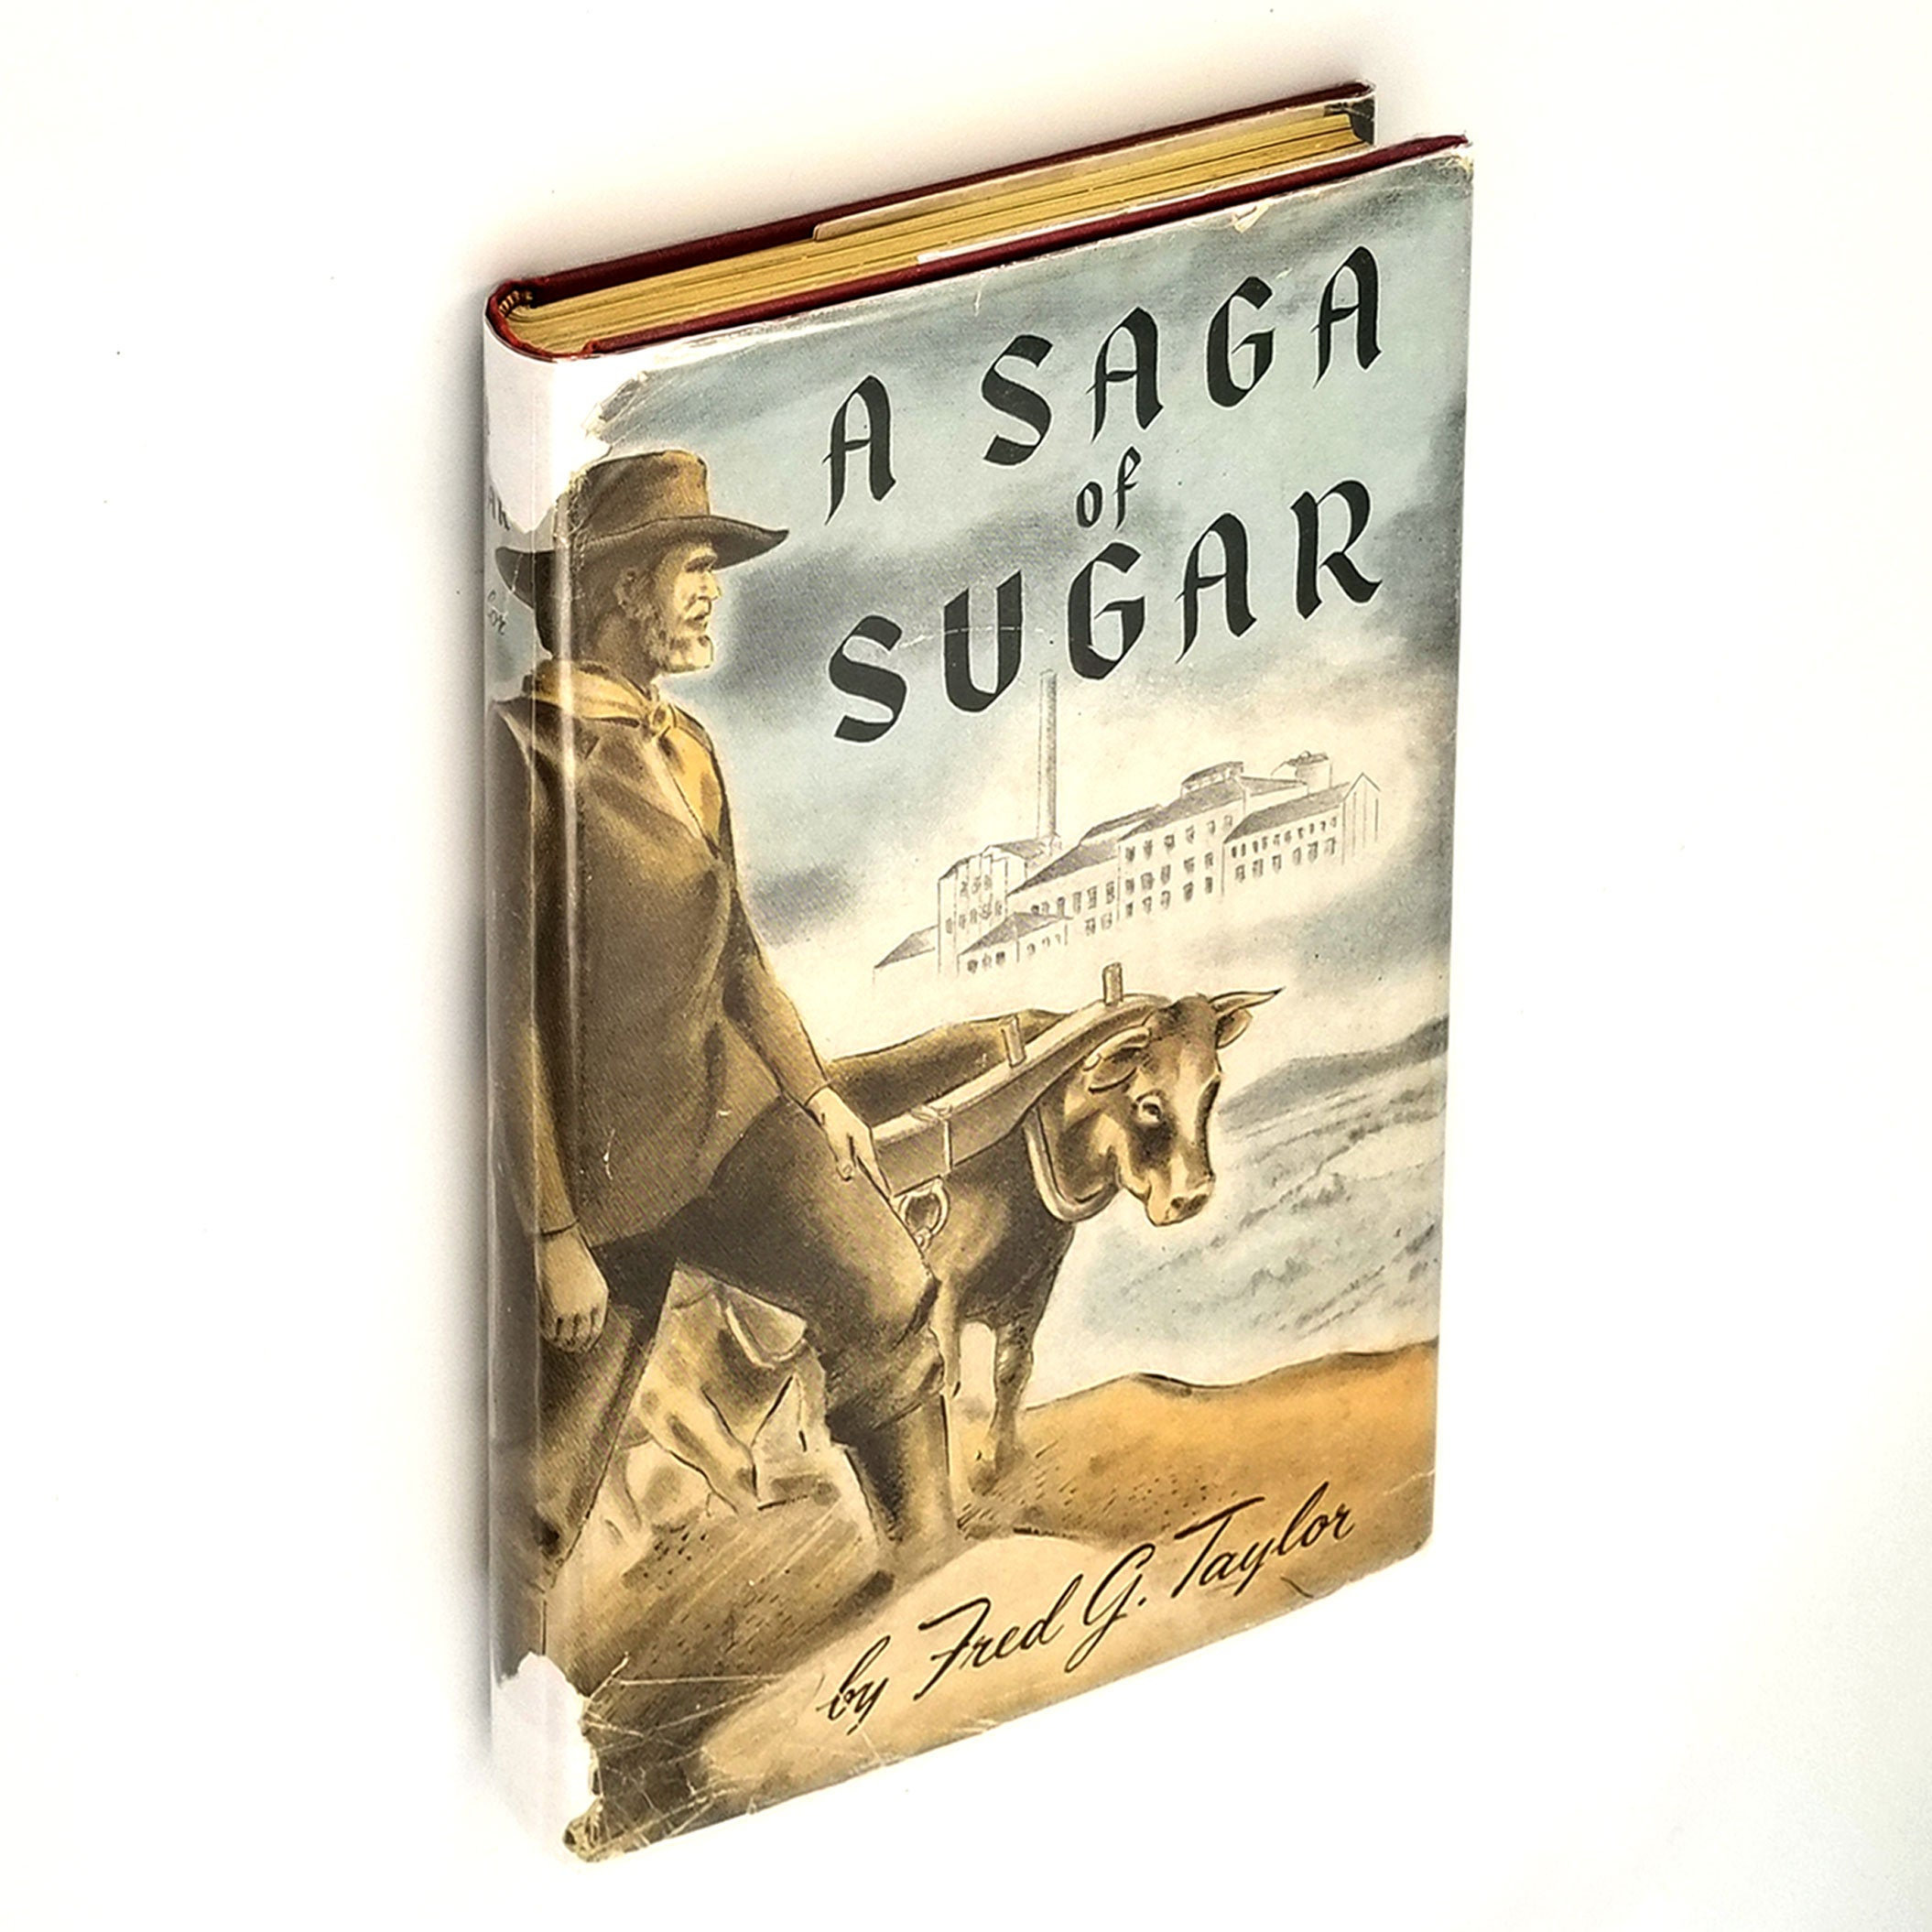 A saga of sugar: Being a story of the romance and development of beet sugar in the Rocky mountain West (book cover)